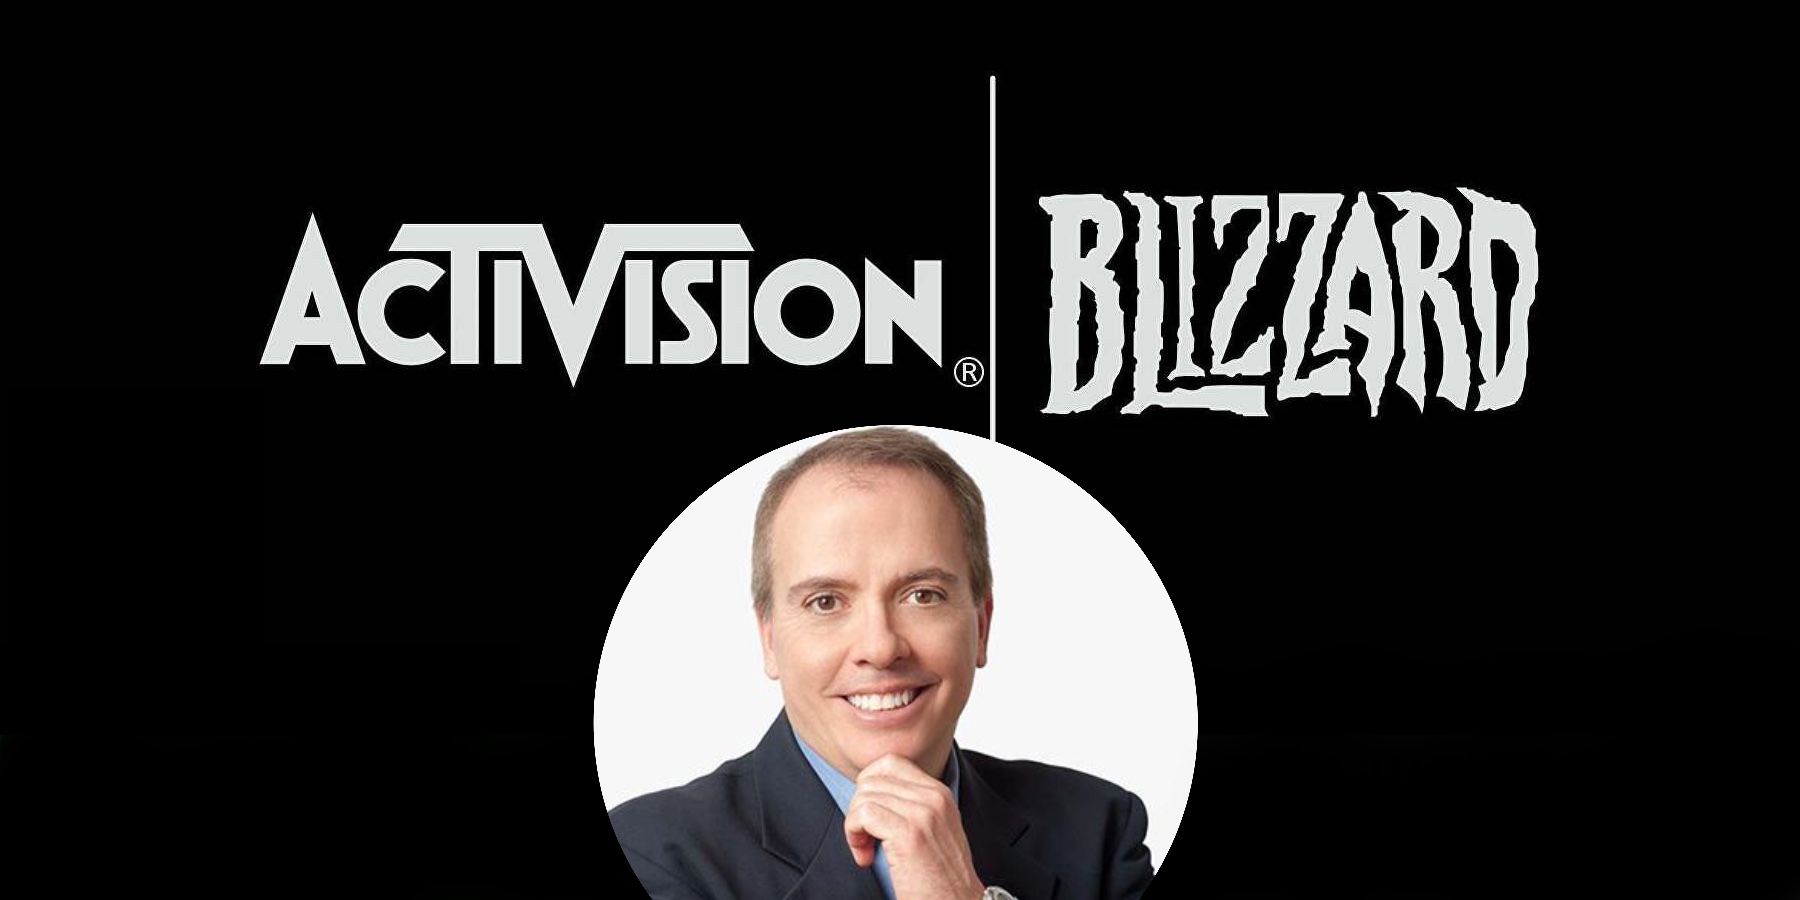 Activision Blizzard's outgoing Chief Operating Officer and President Daniel Alegre